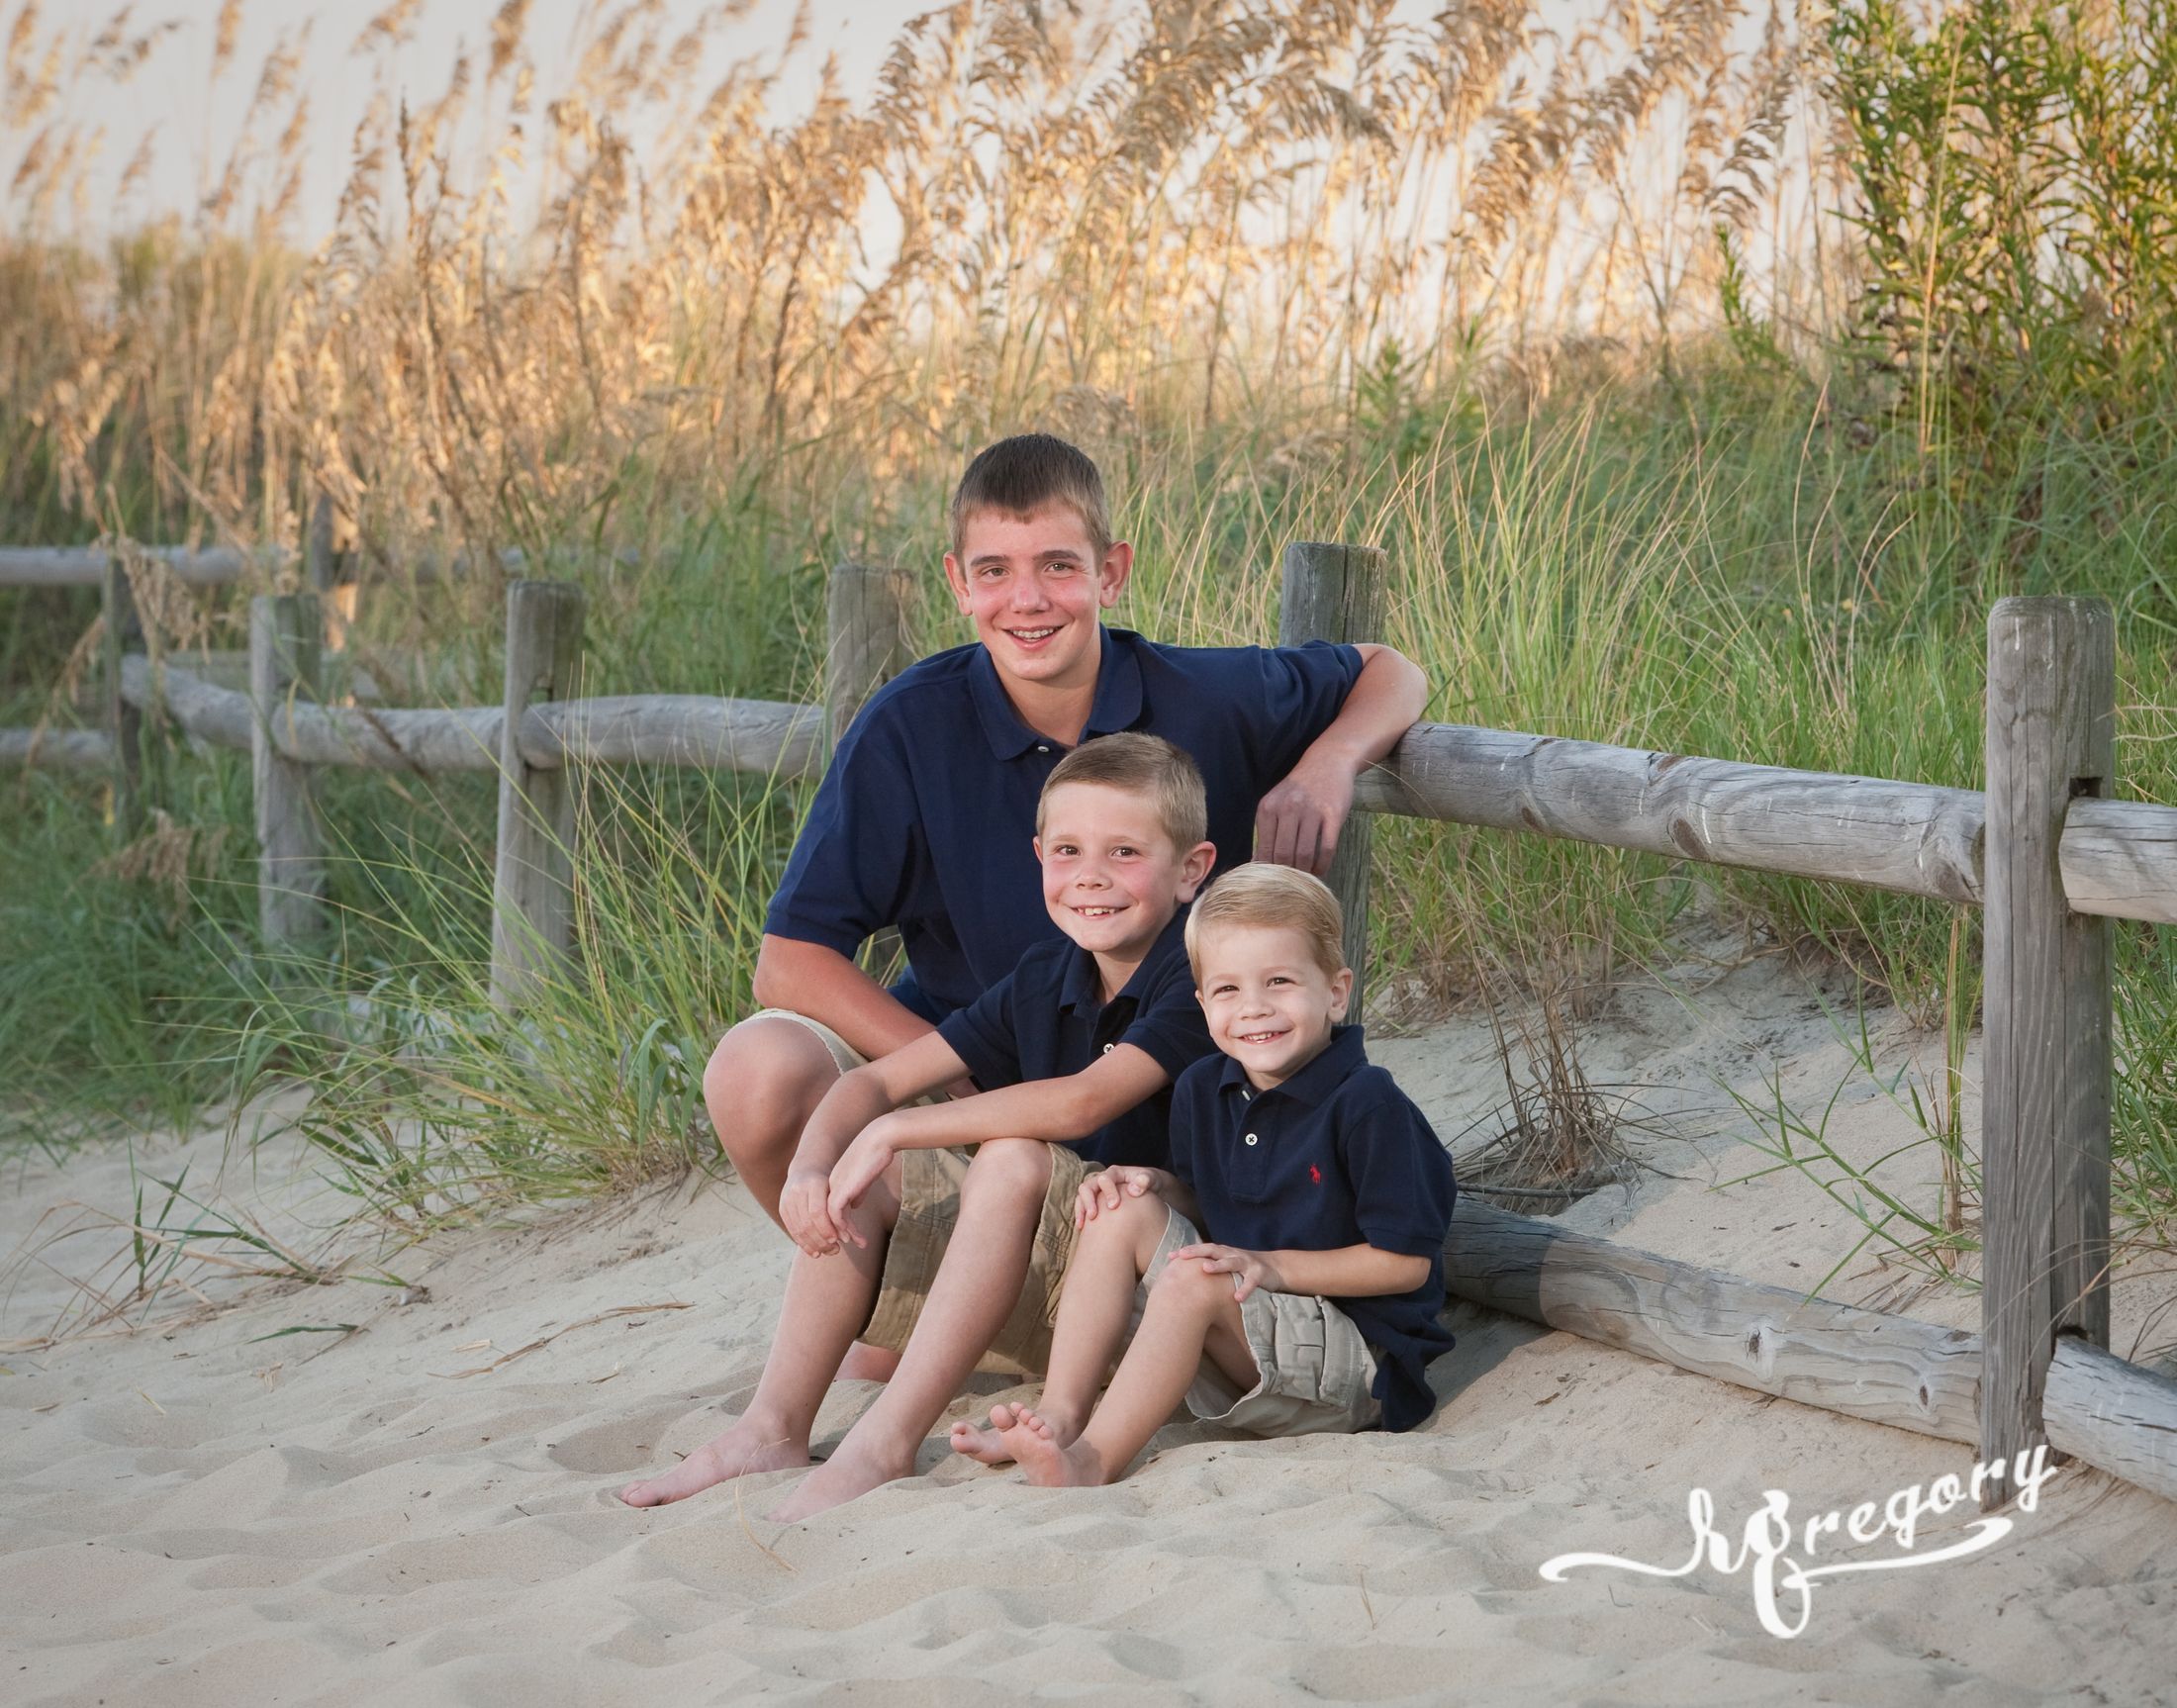 Snell professional child photography in virginia beach